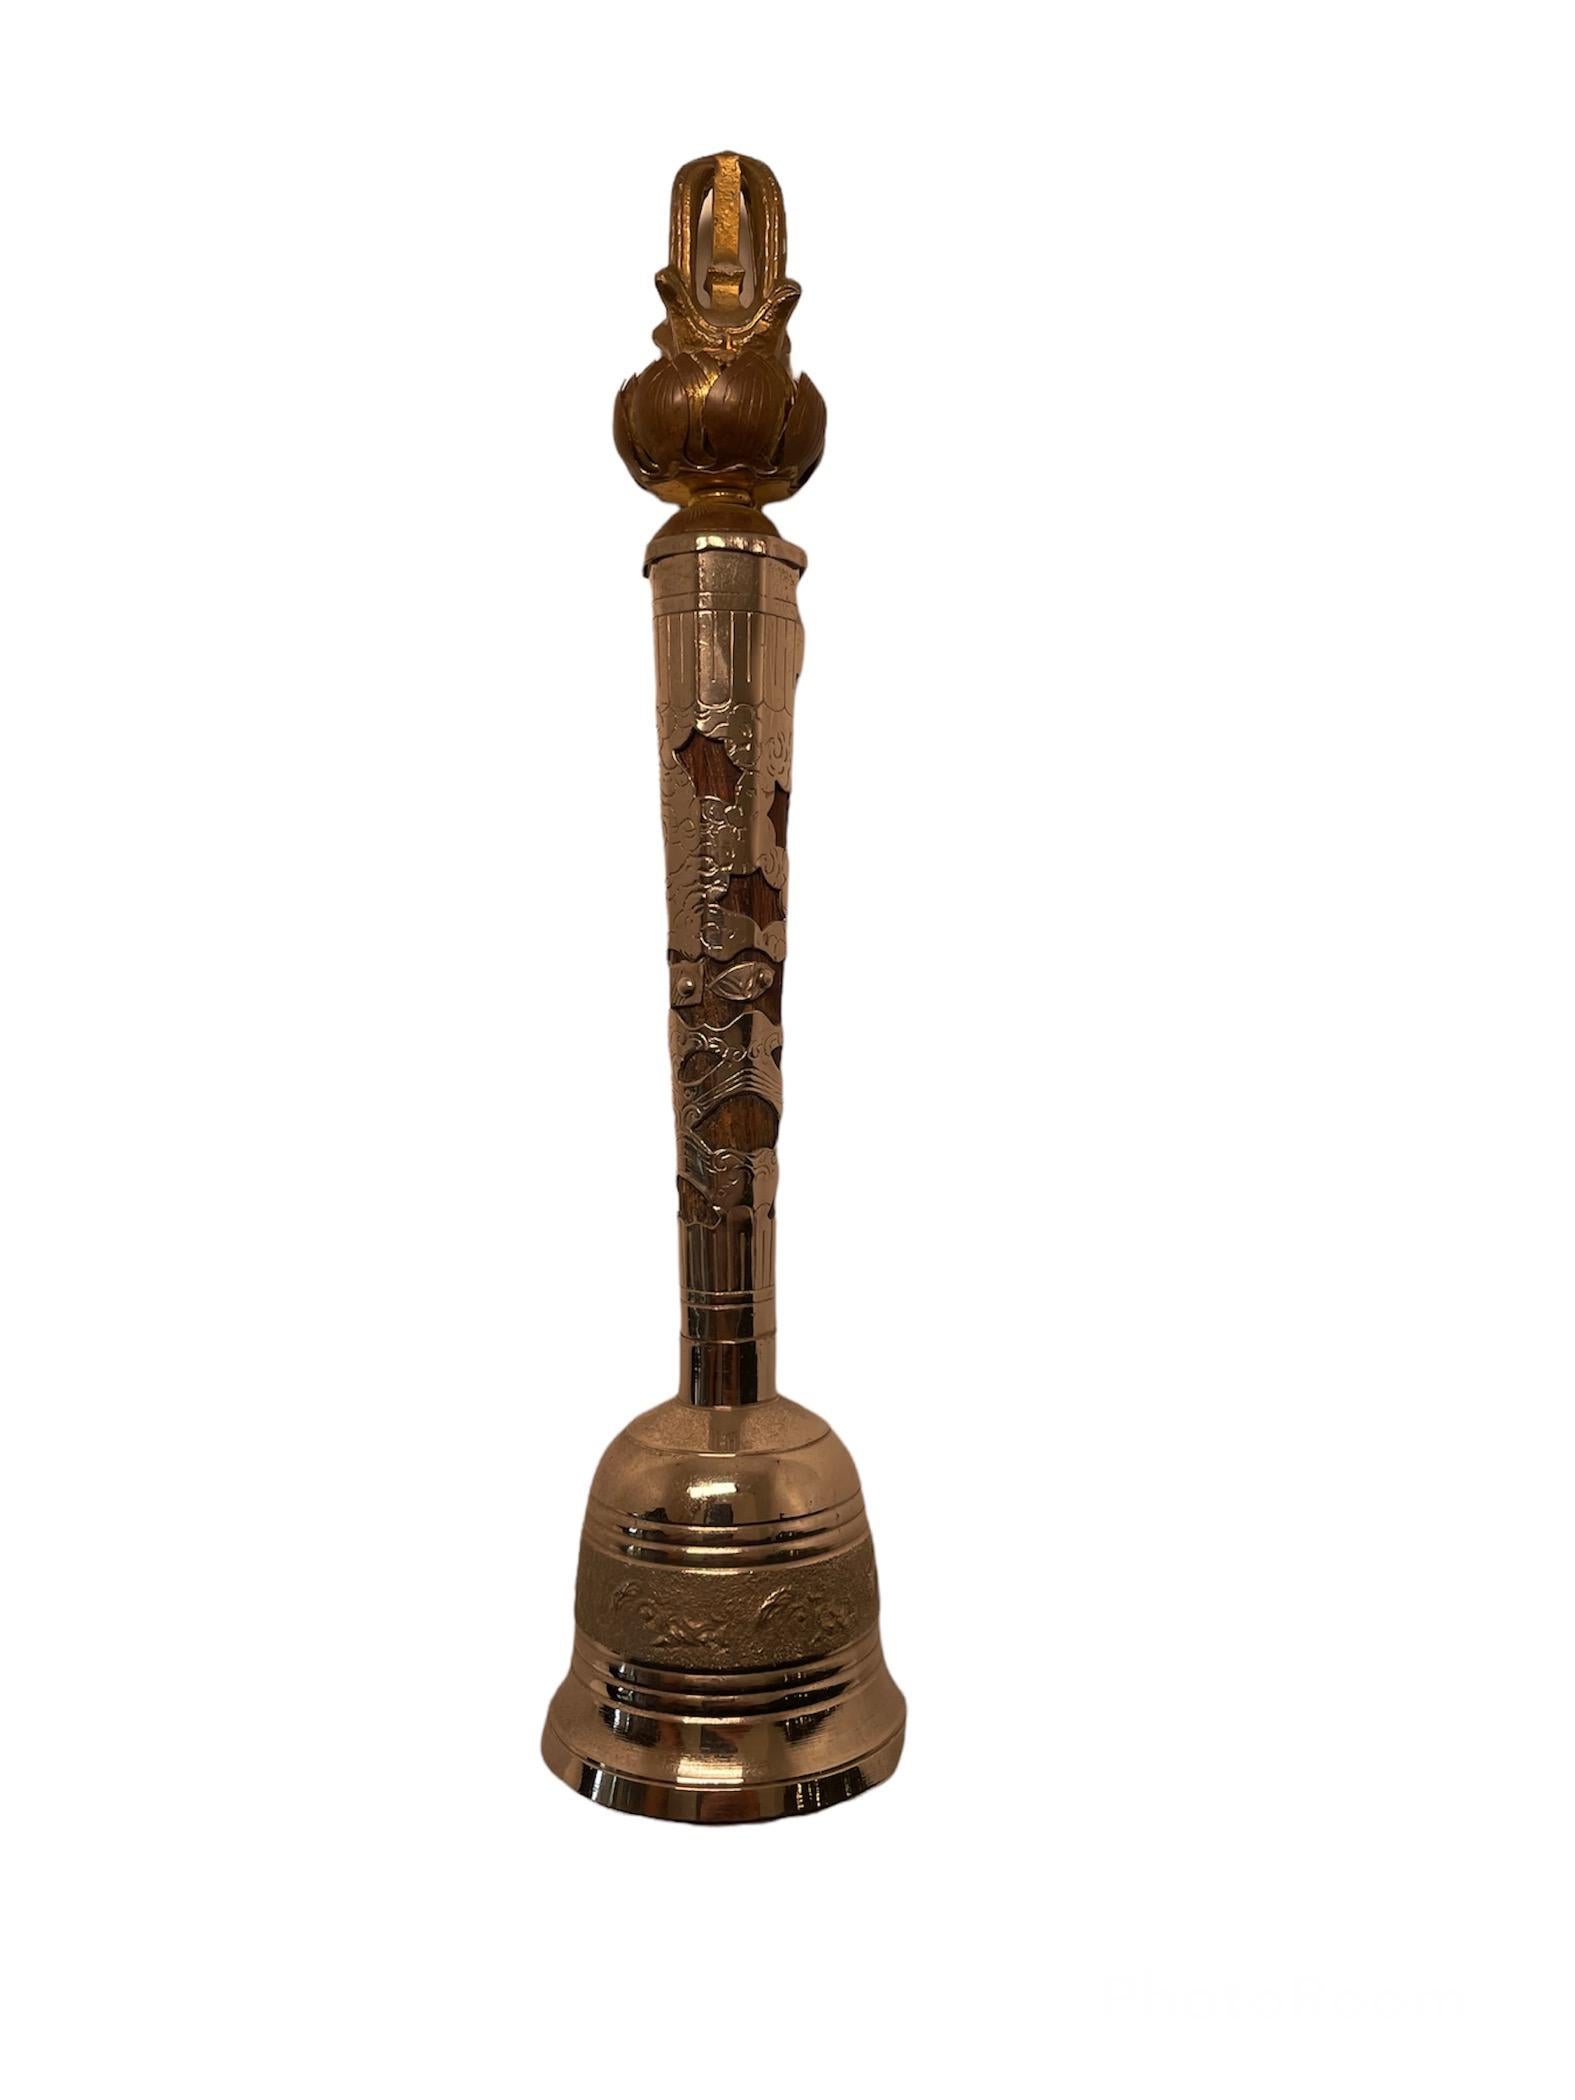 This is a Tibetan Buddhism silver overlay and wood bell. The bell metal body as well of the silver overlay handle is engraved with flowers. The top of the handle is decorated with a finial made of Lotus flowers and a crown. The Lotus flower